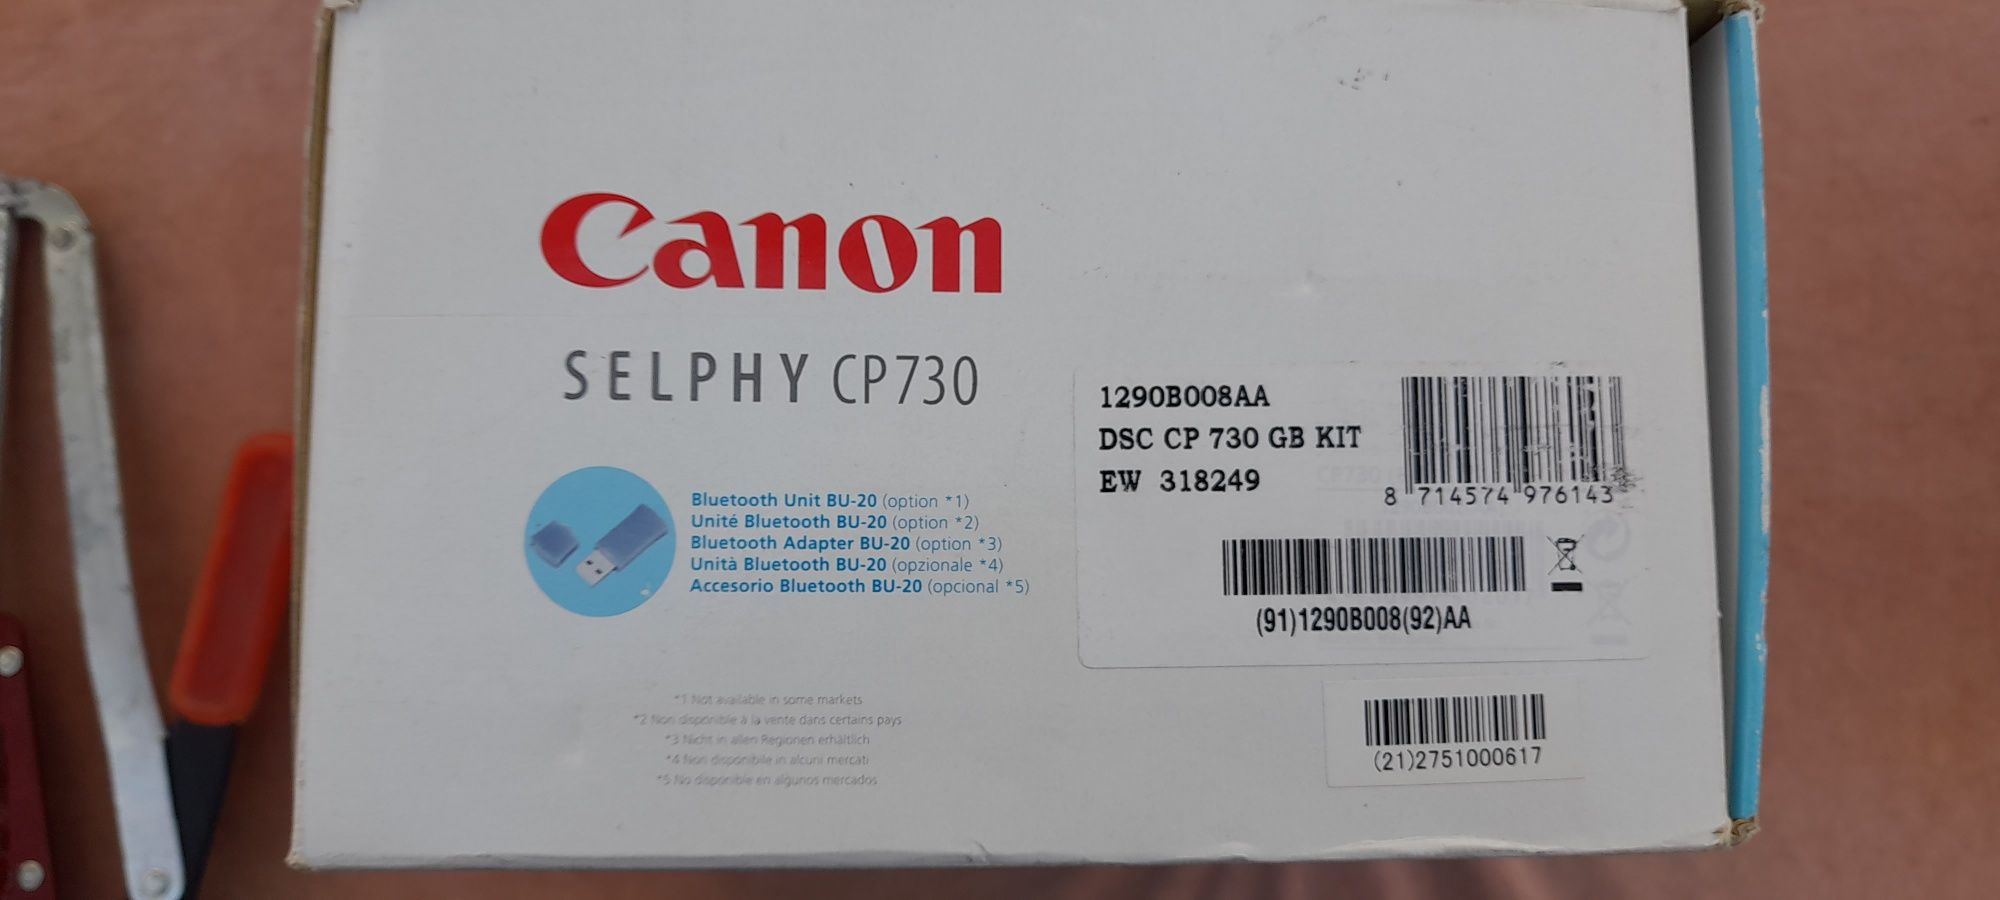 Canon Selphy CP730